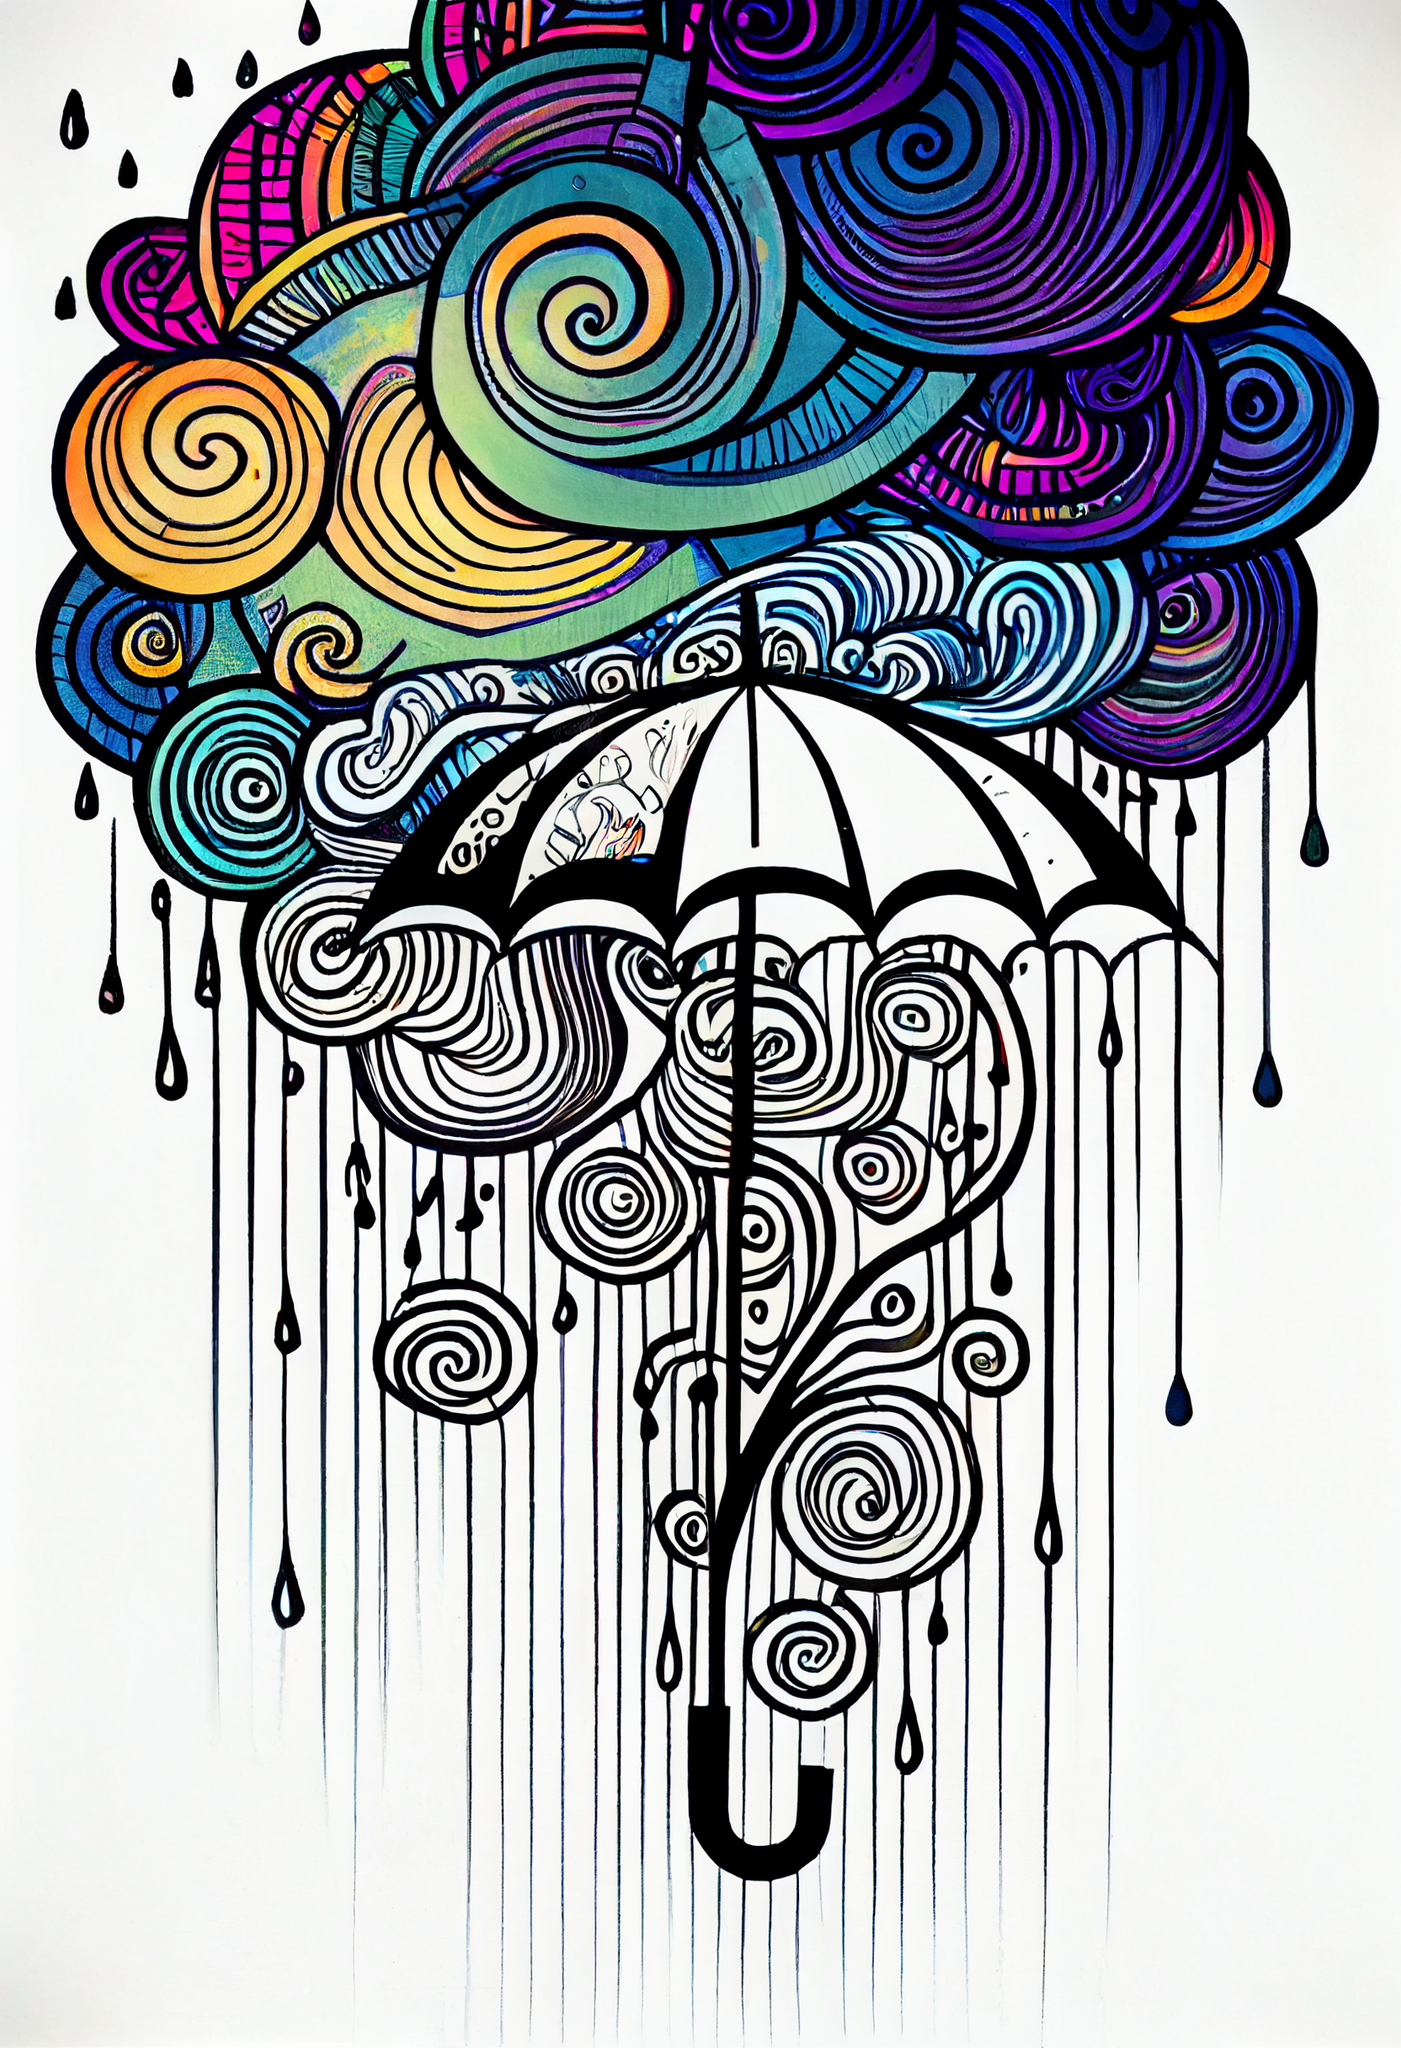 Whimsical Doodle Art Print of an Umbrella with Colorful Clouds